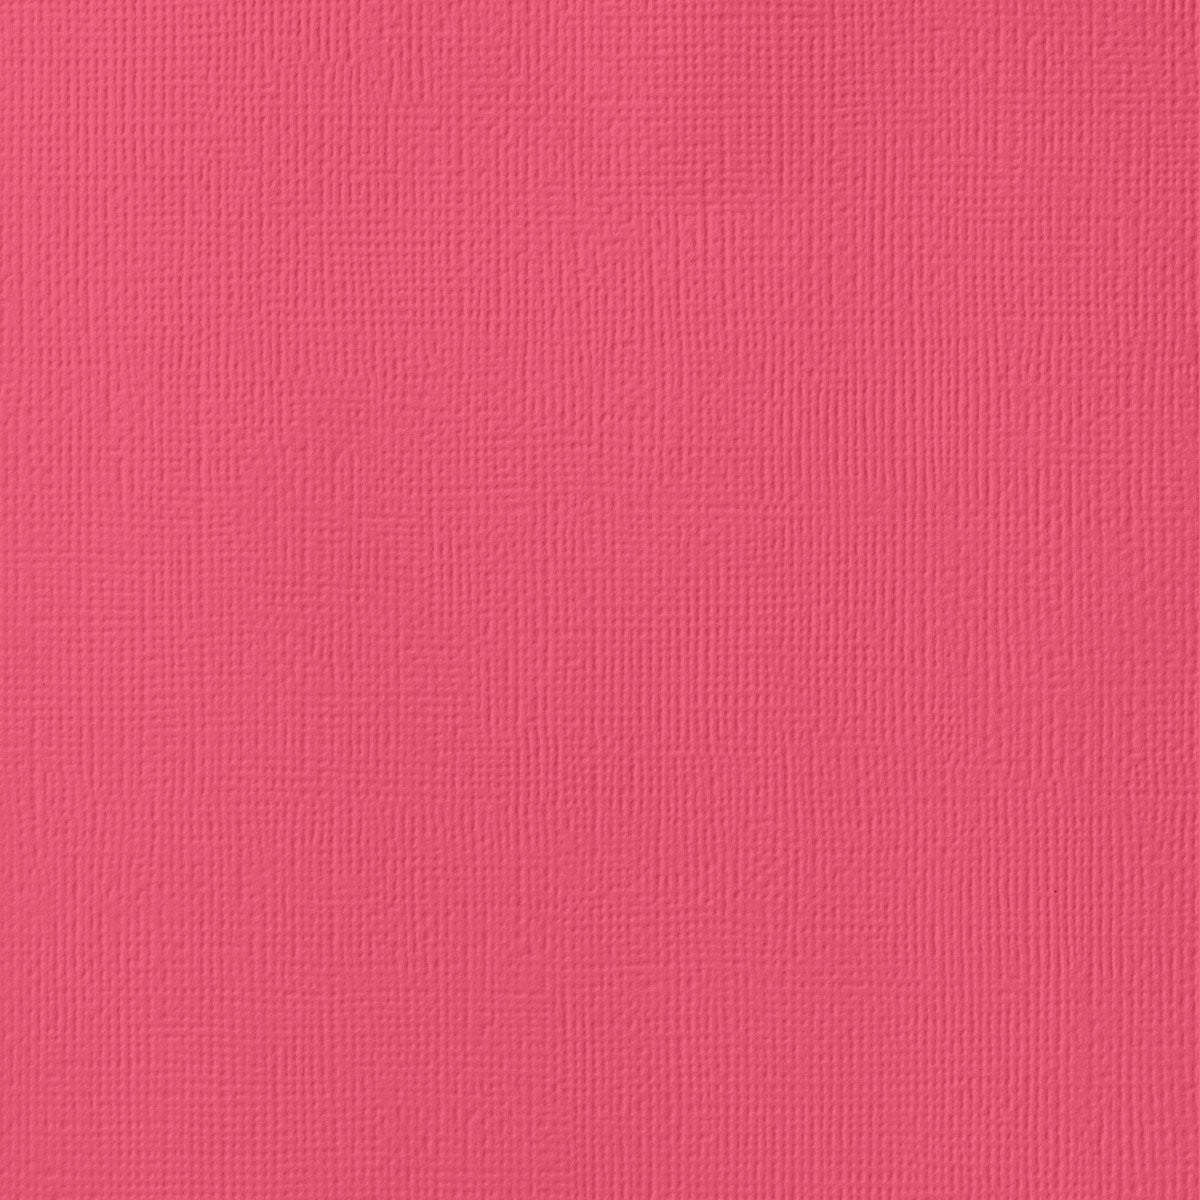 LUXPaper 8.5” x 11” Cardstock for Crafts and Cards in 100 lb. Candy Pink,  Scrapbook Supplies, 50 Pack (Pink)